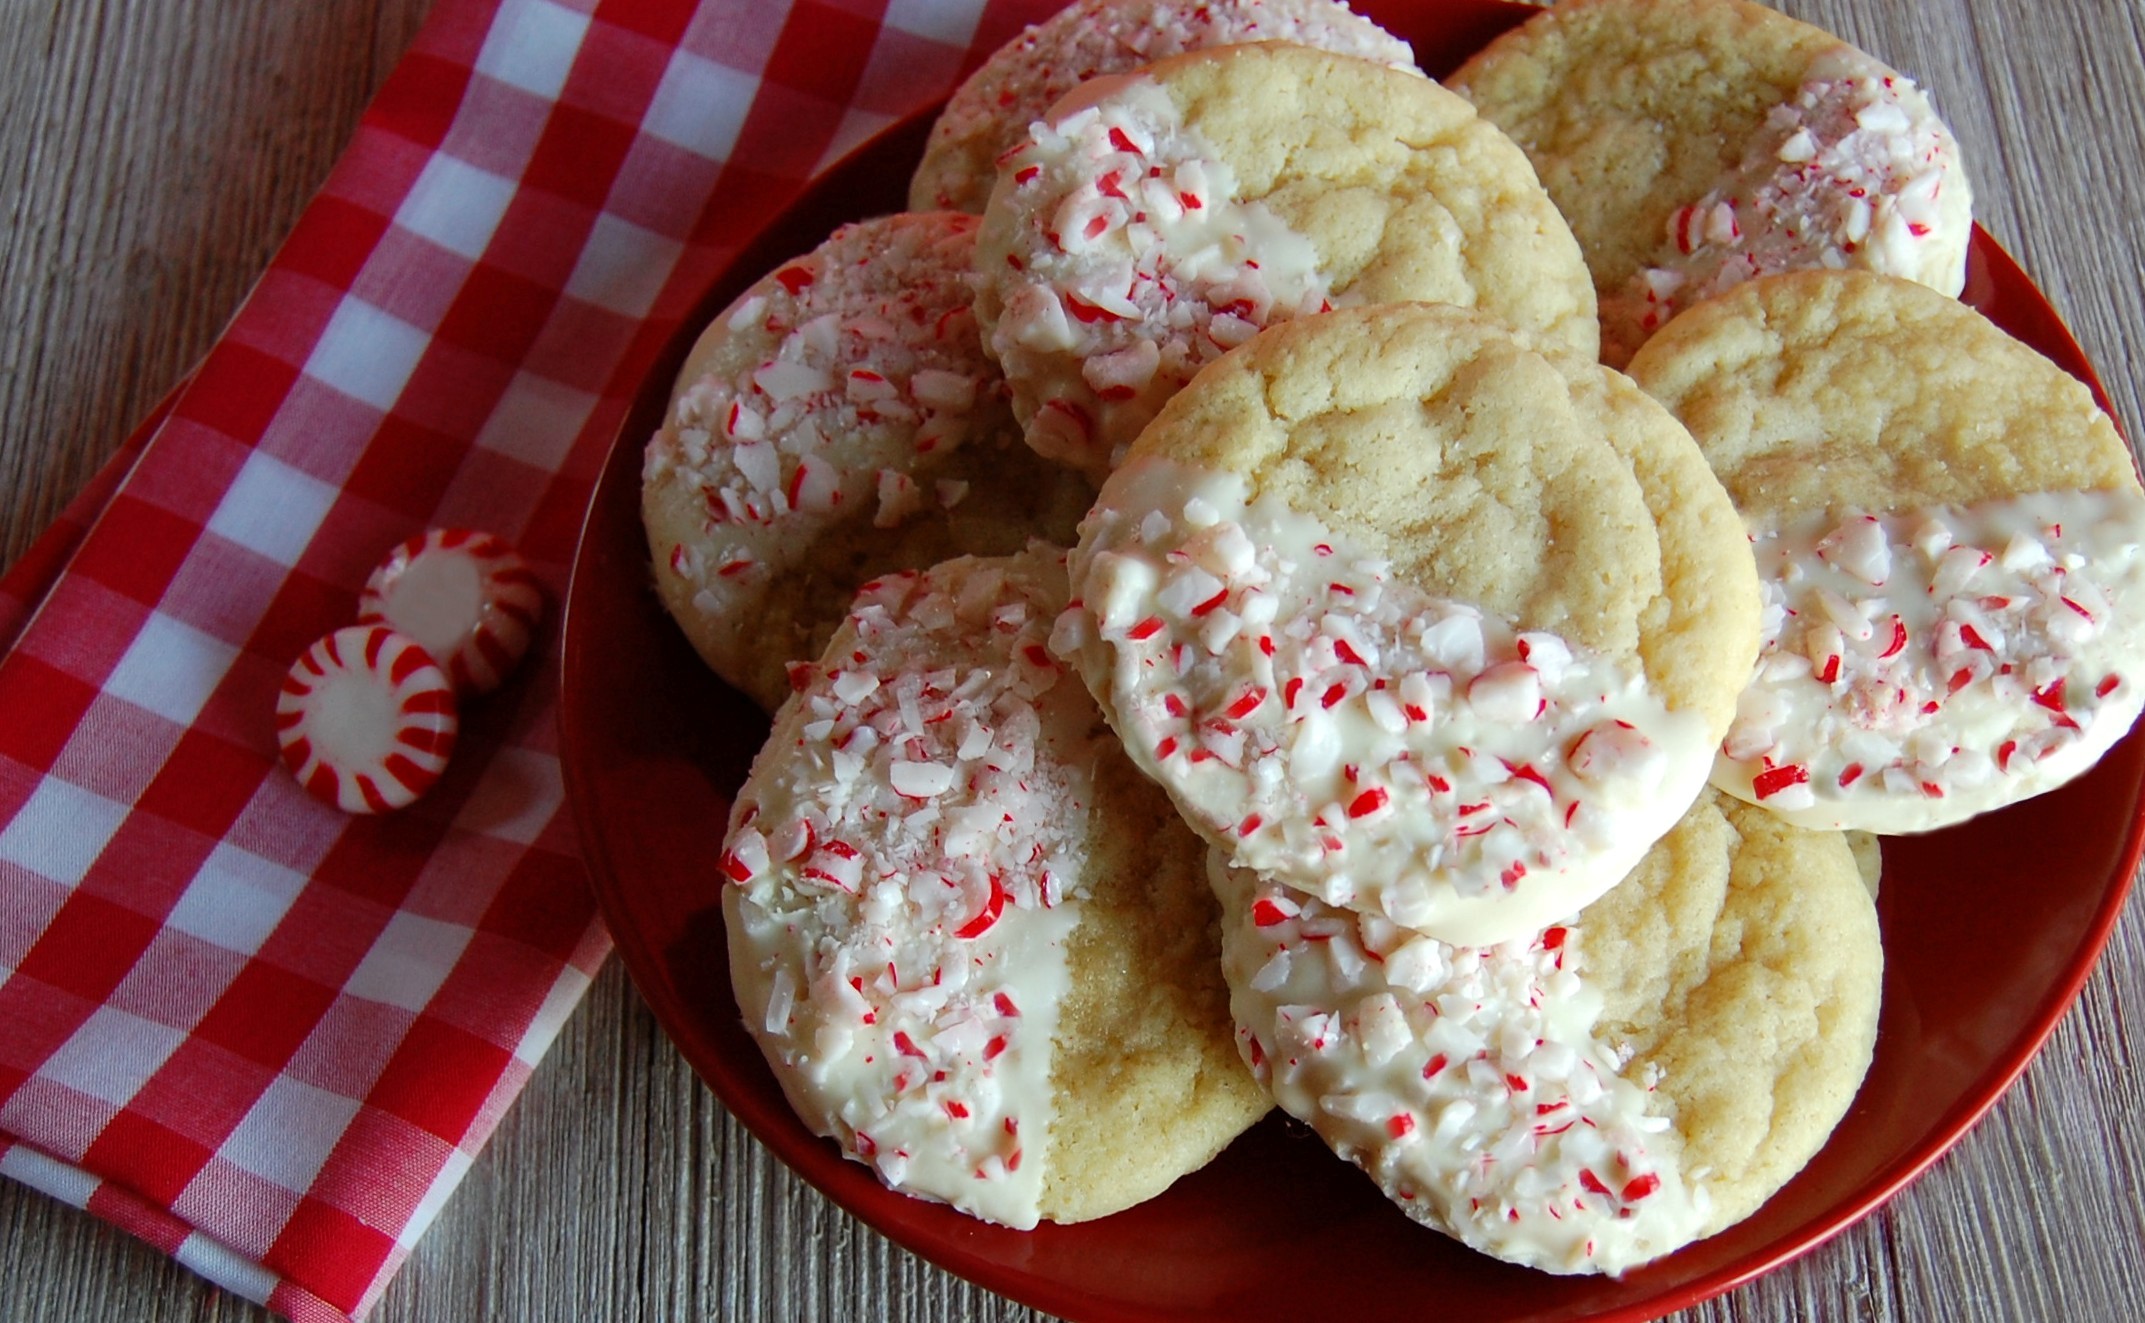 Peppermint White Chocolate Sugar Cookies Recipe - Chenée Today